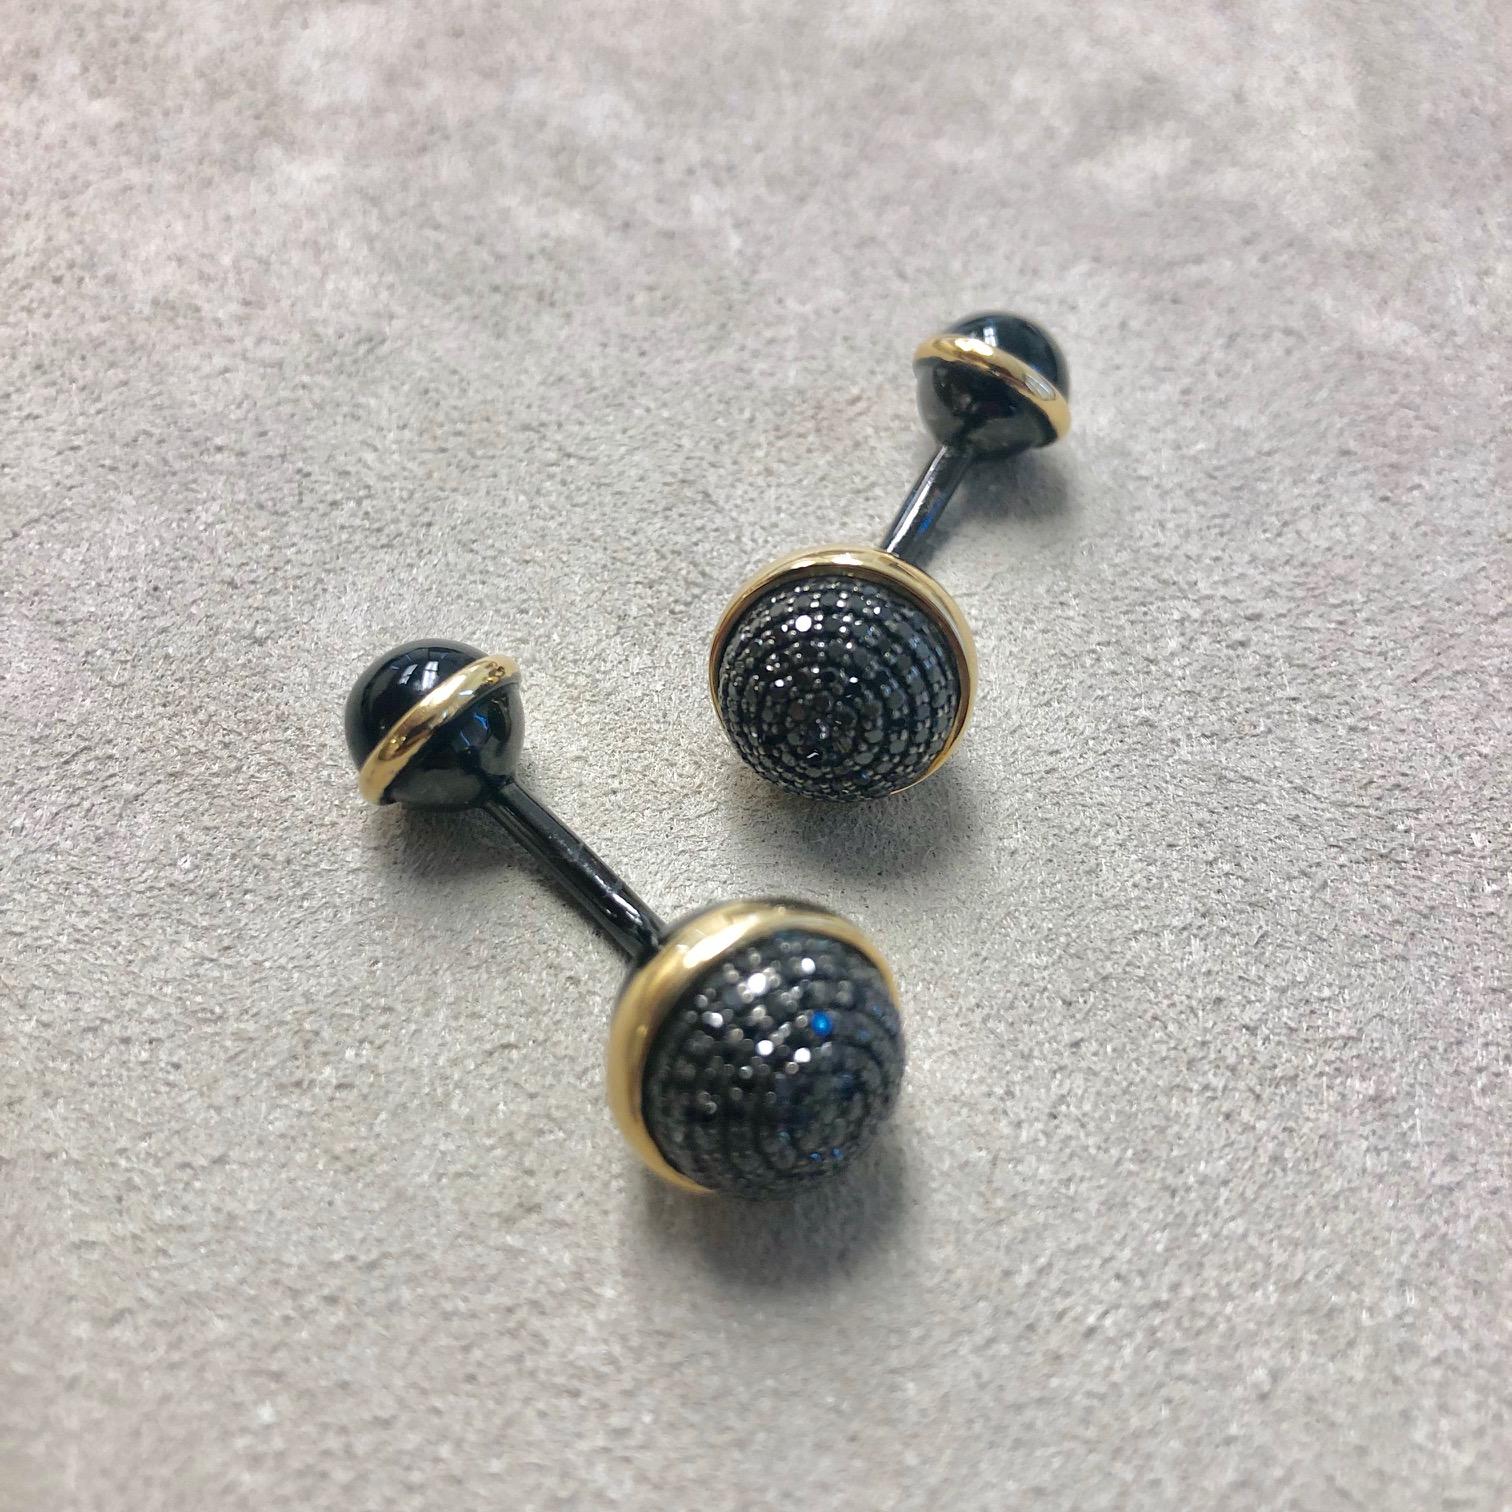 Round Cut Syna Gold and Oxidized Silver Cuff Links with Black Diamonds and Black Onyx